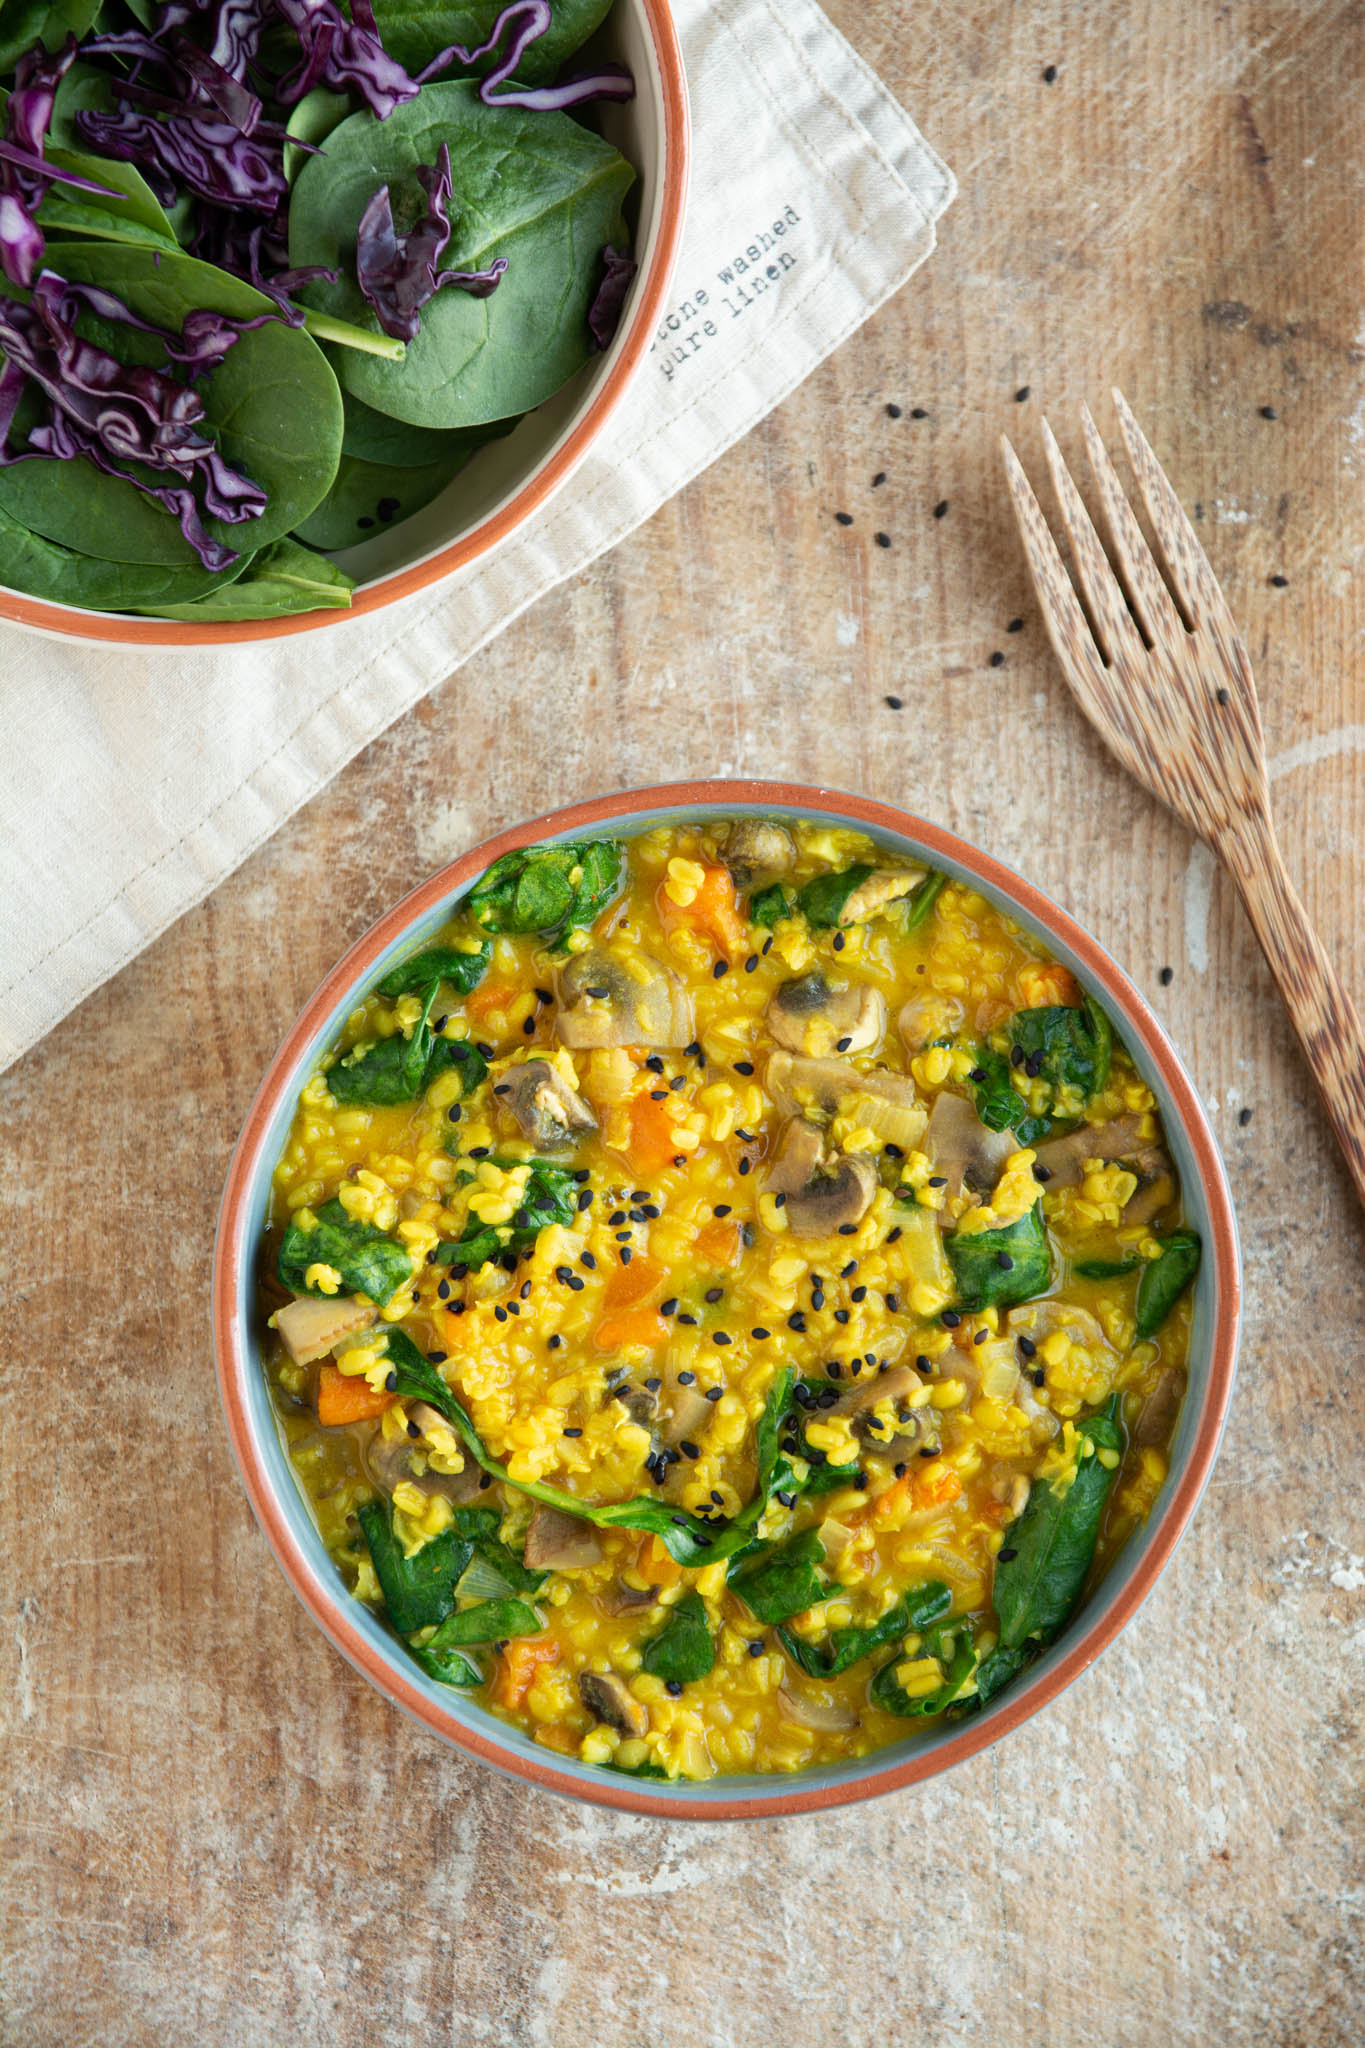 This creamy moong dal recipe with spinach and mushrooms is a great weekday meal accompanied by green salad and rice or pasta.